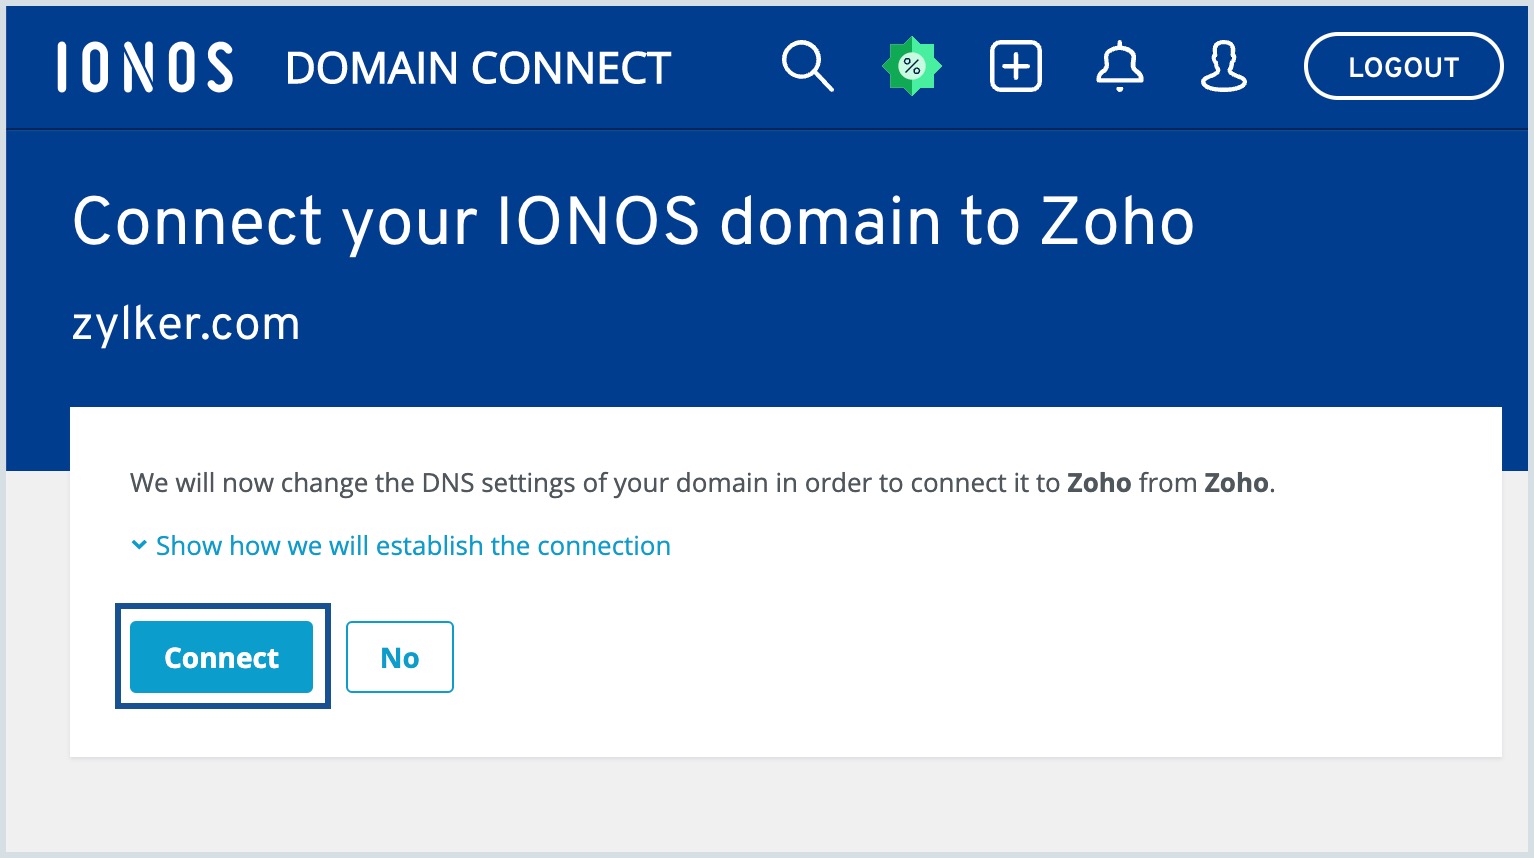 IONOS domain connect